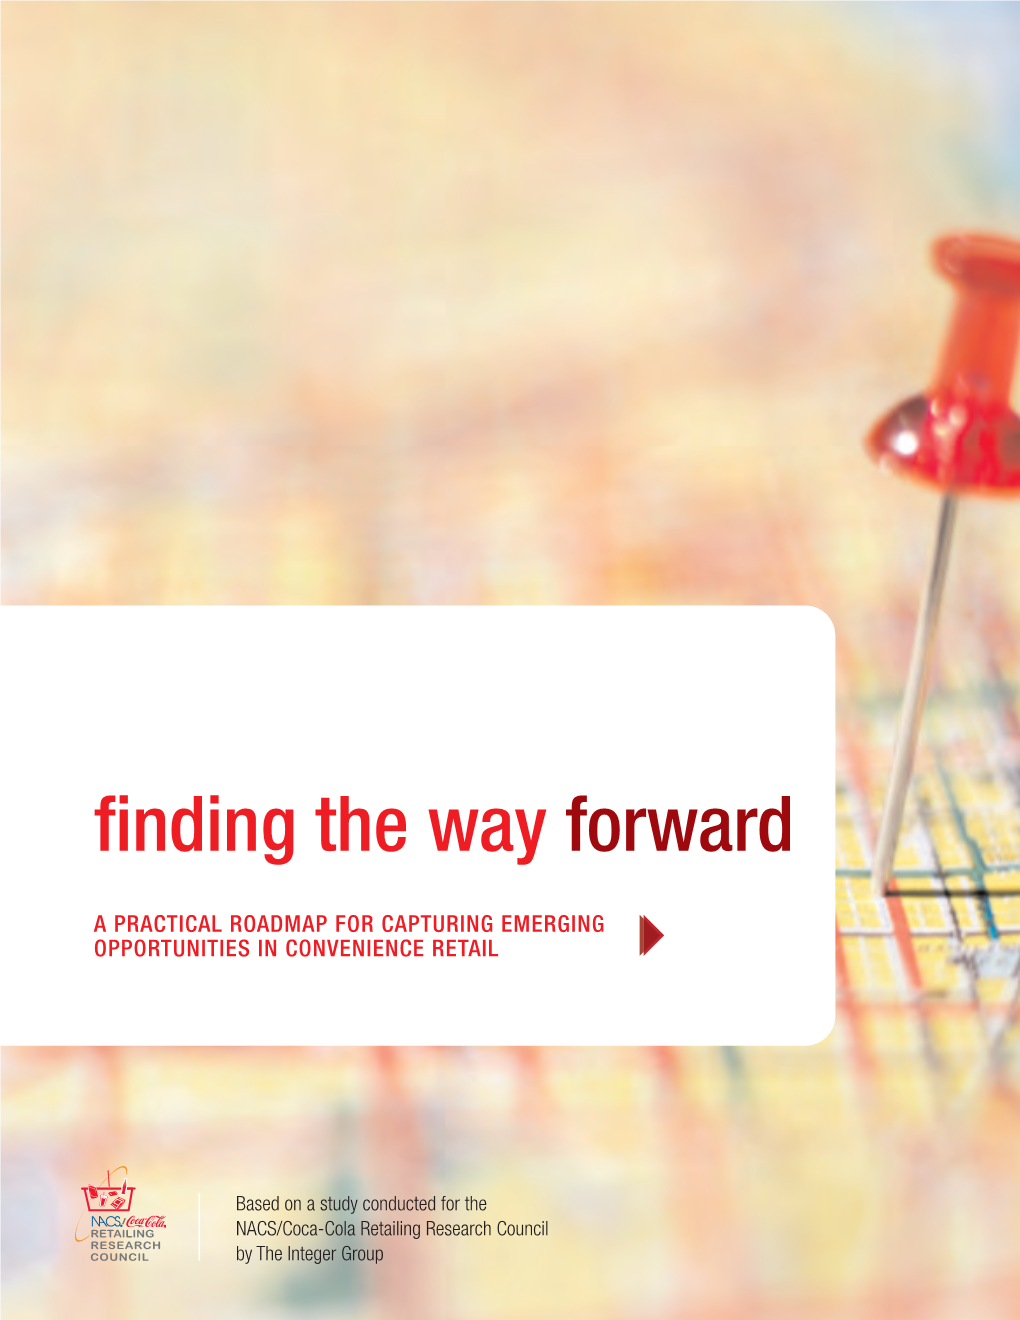 Finding the Way Forward